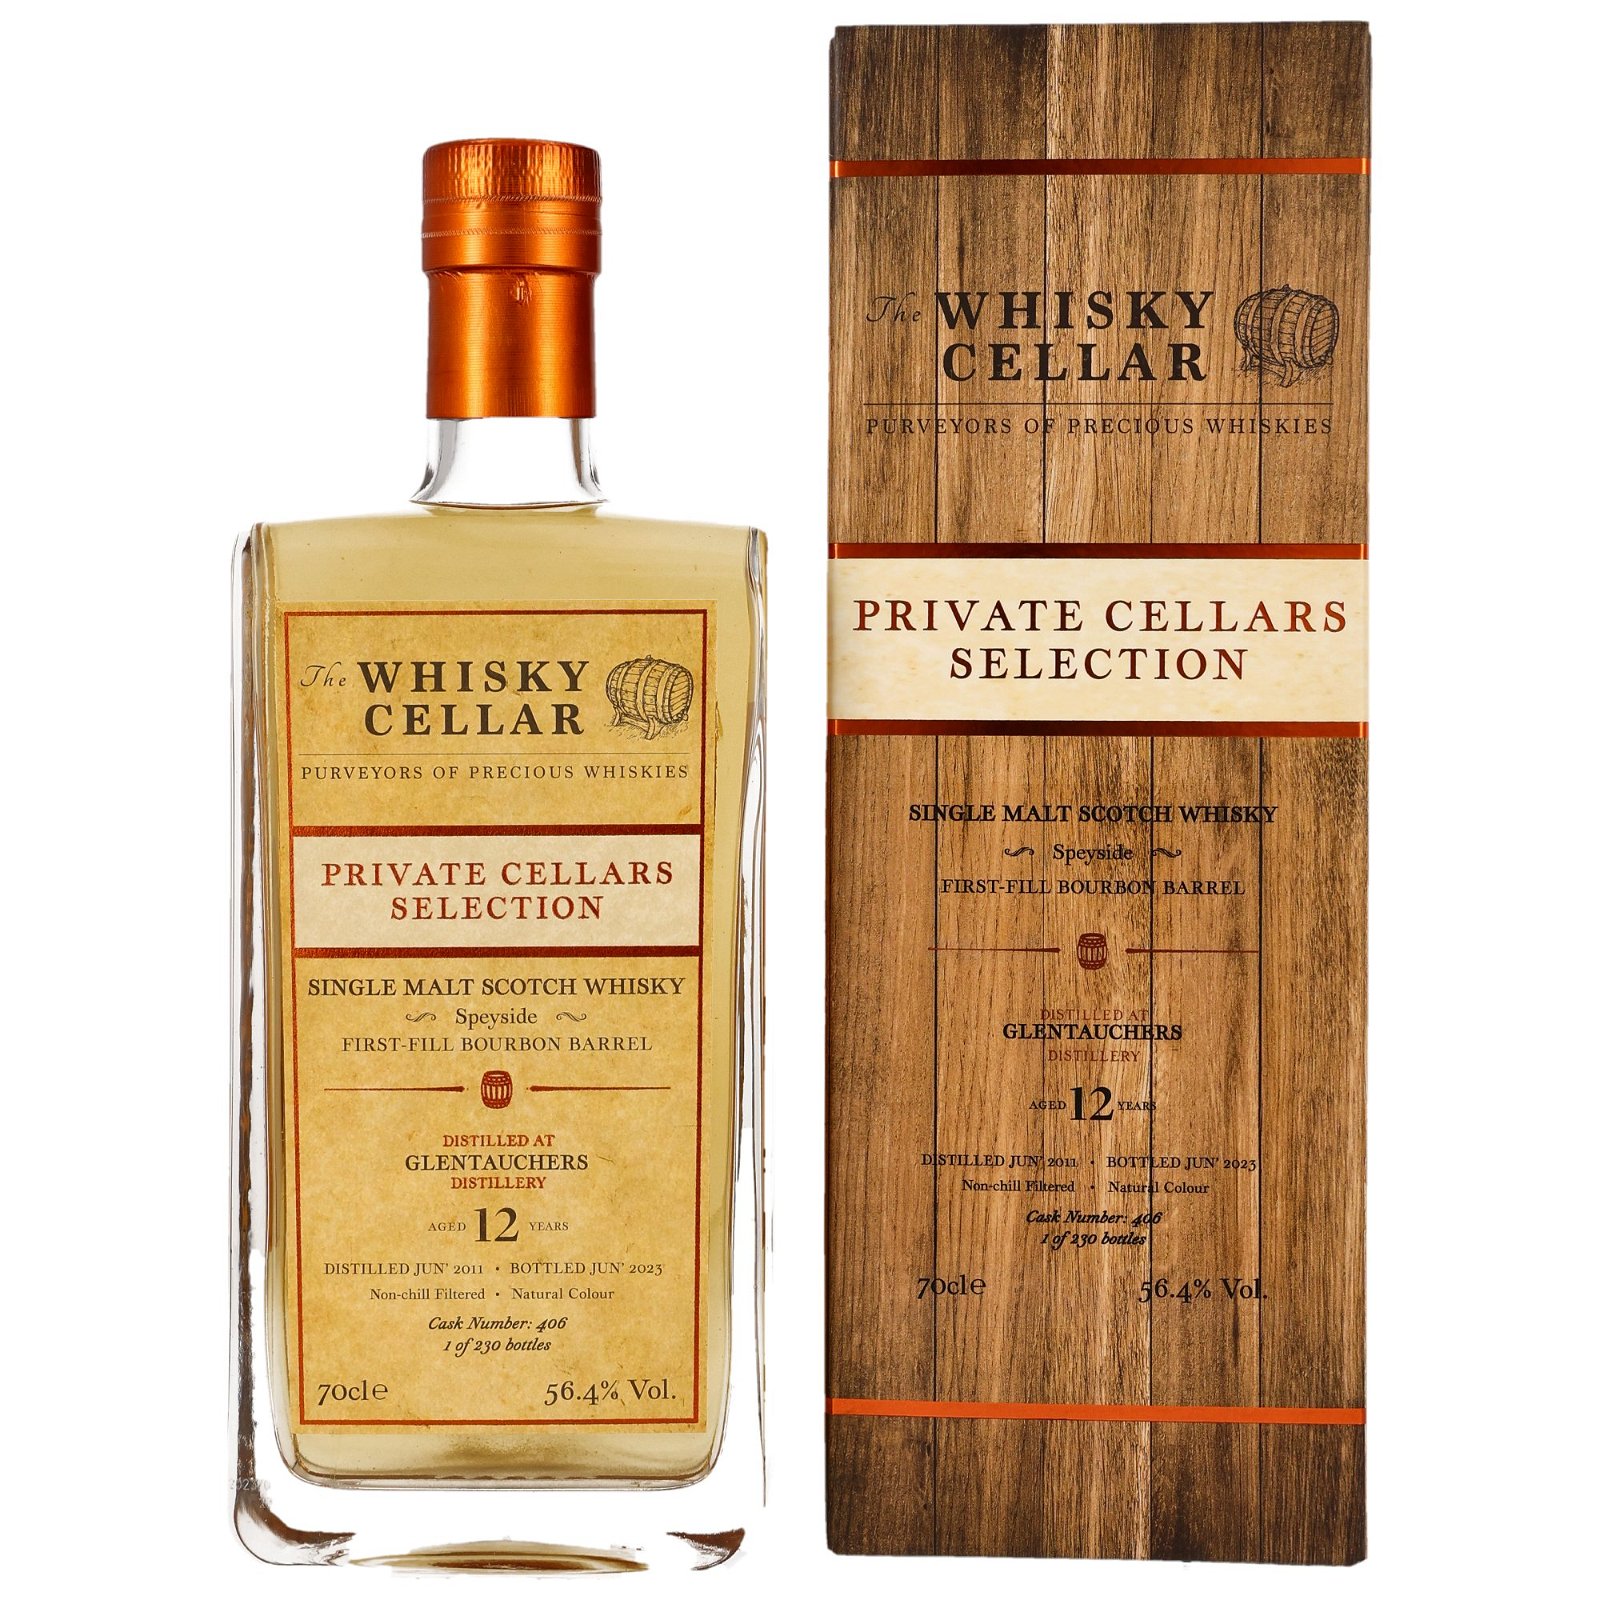 Glentauchers 2011/2023 - 12 Jahre First Fill Bourbon Barrel No. 406 Private Cellars Selection (The Whisky Cellar)